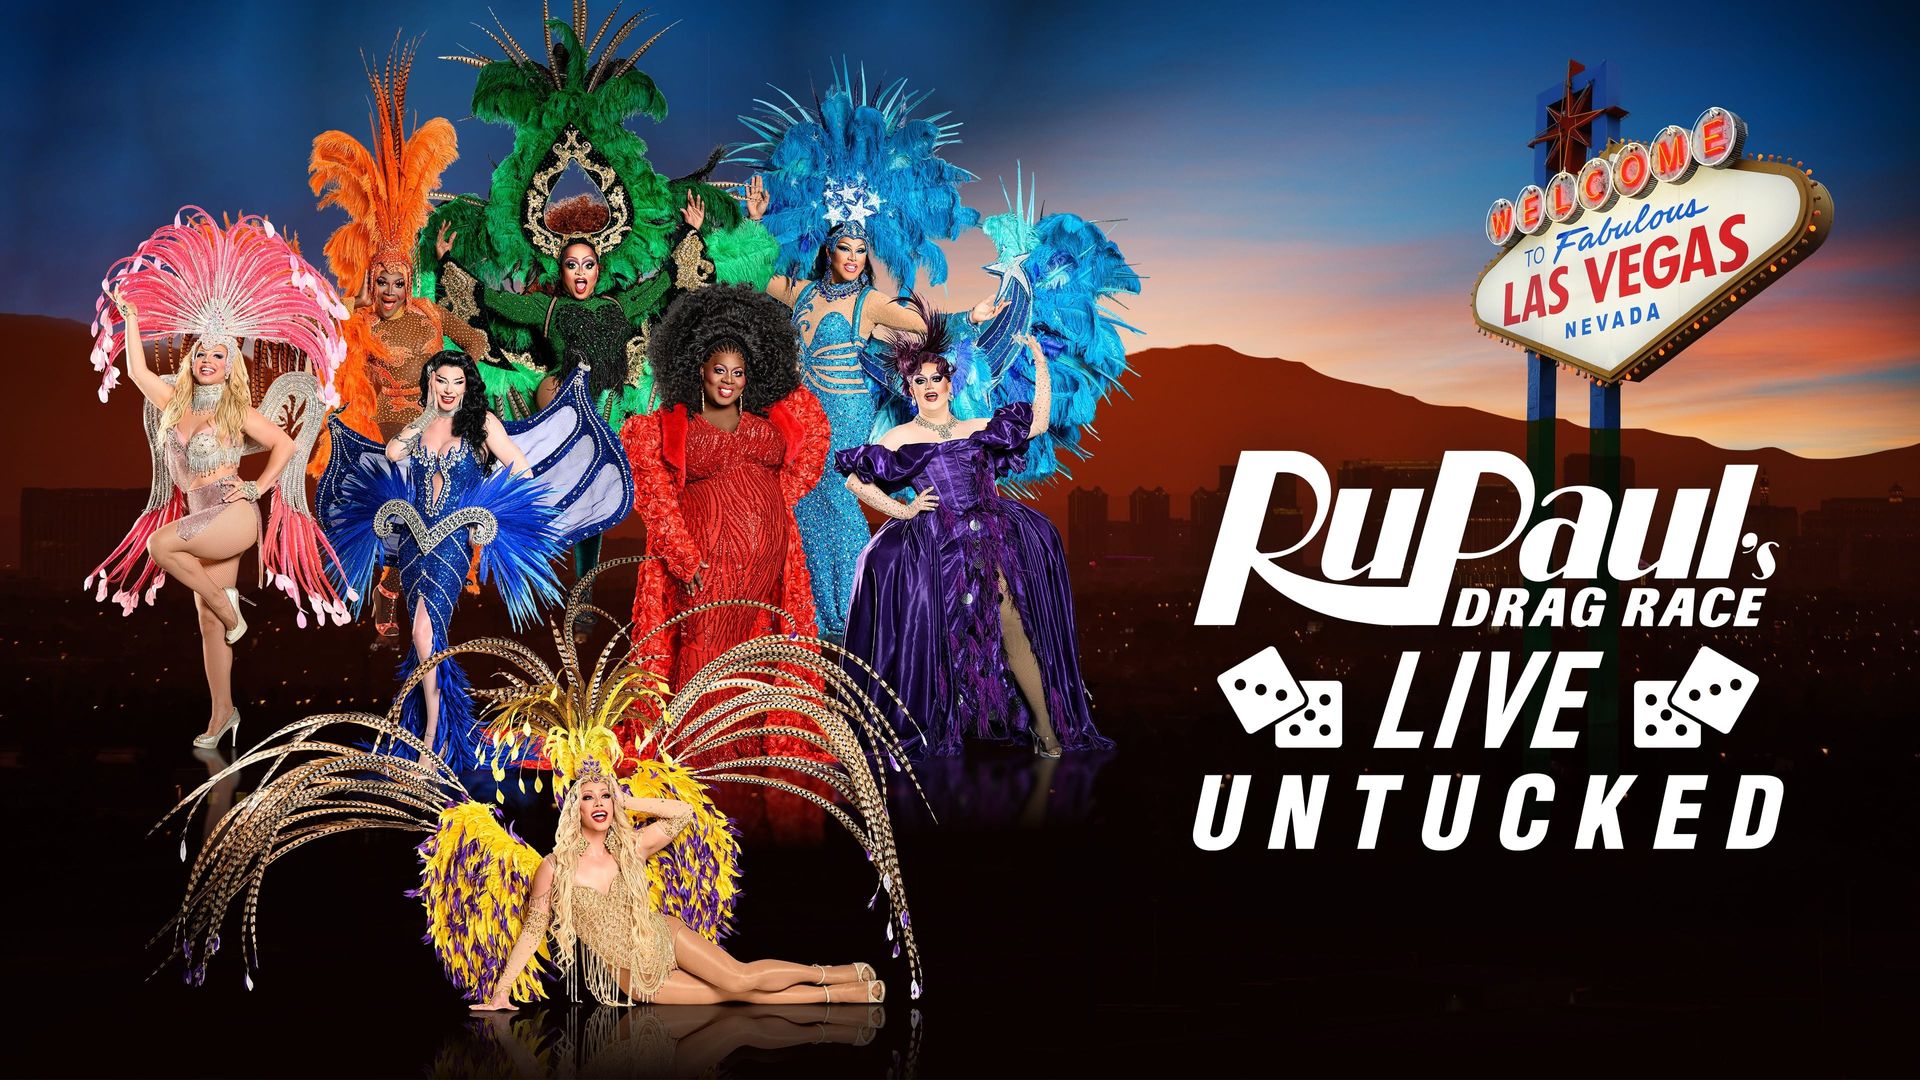 RuPaul's Drag Race Live Untucked background